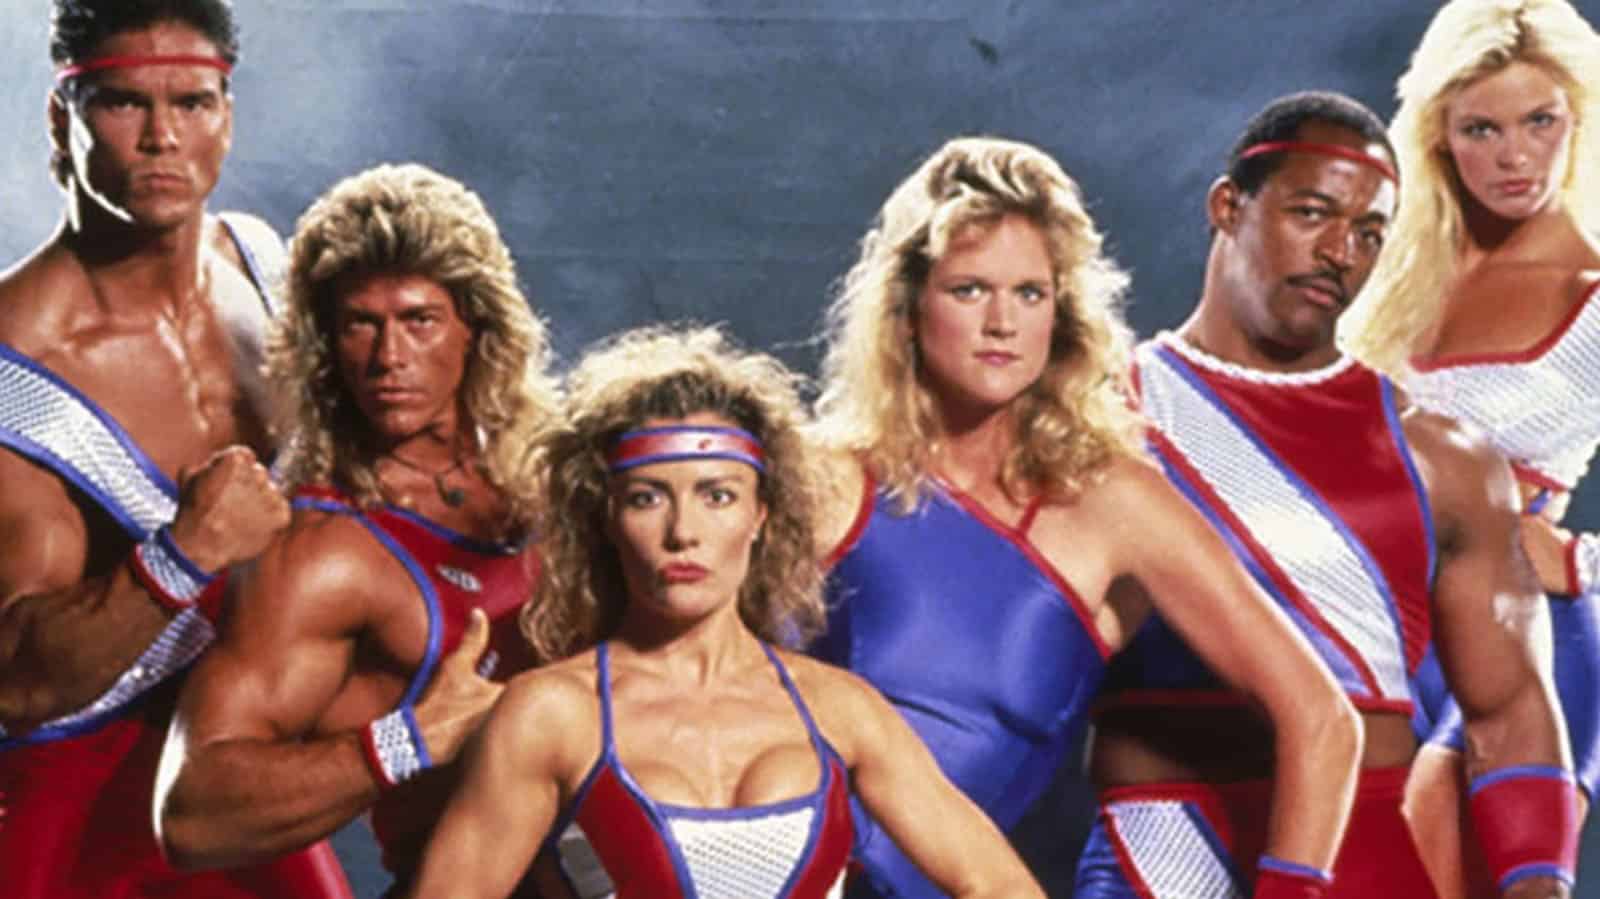 What Happened To Malibu From American Gladiators